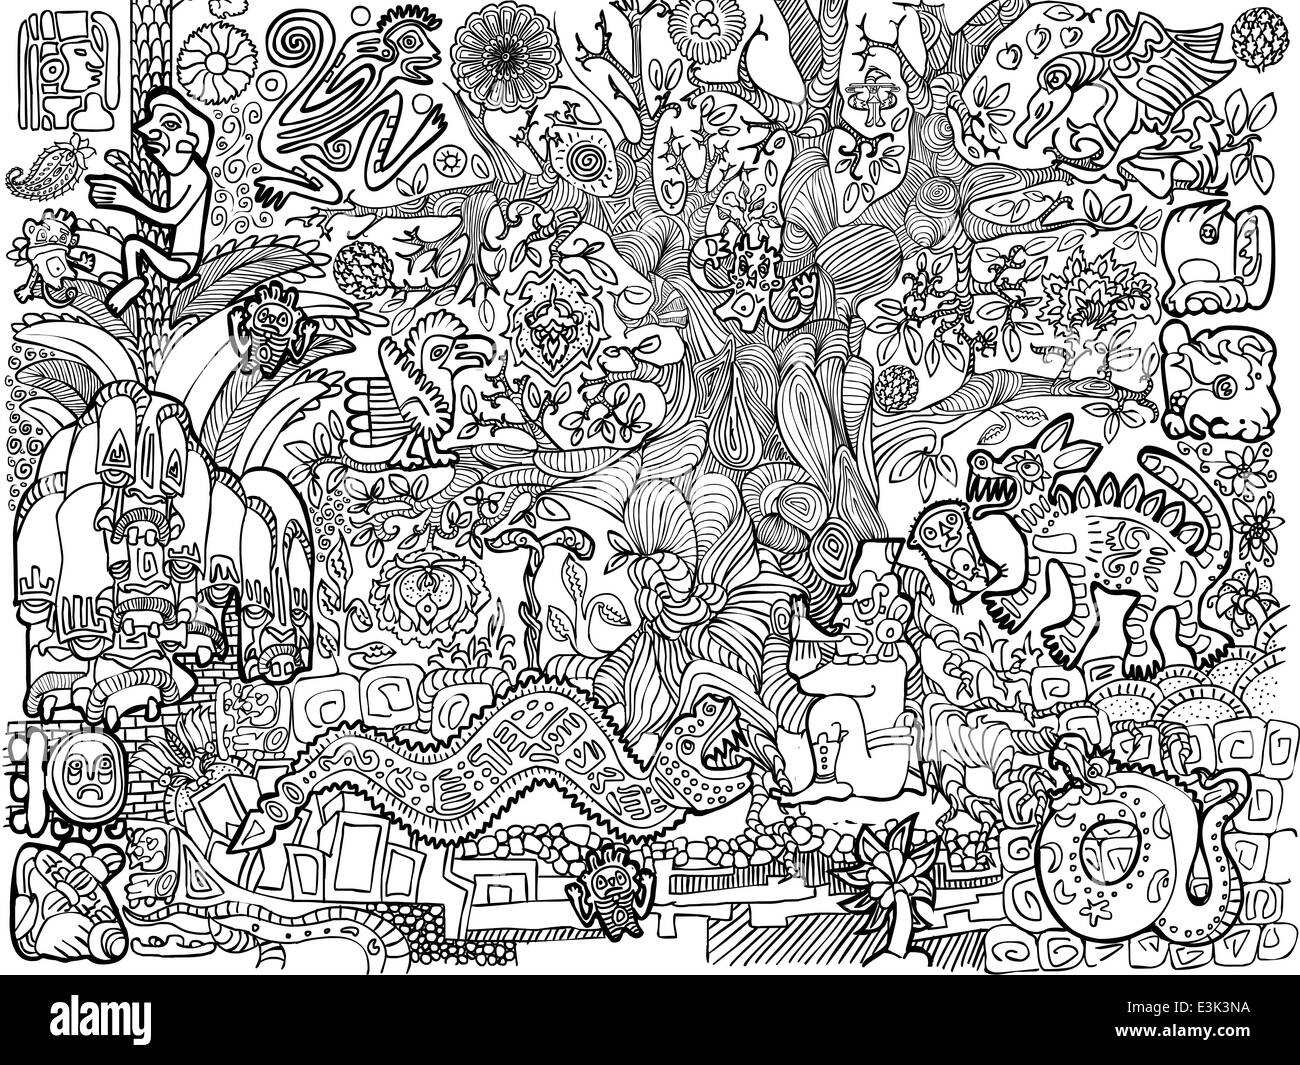 Some abstract background with a lot of details, plants, animals, reptiles, flowers, masks etc. Stock Photo